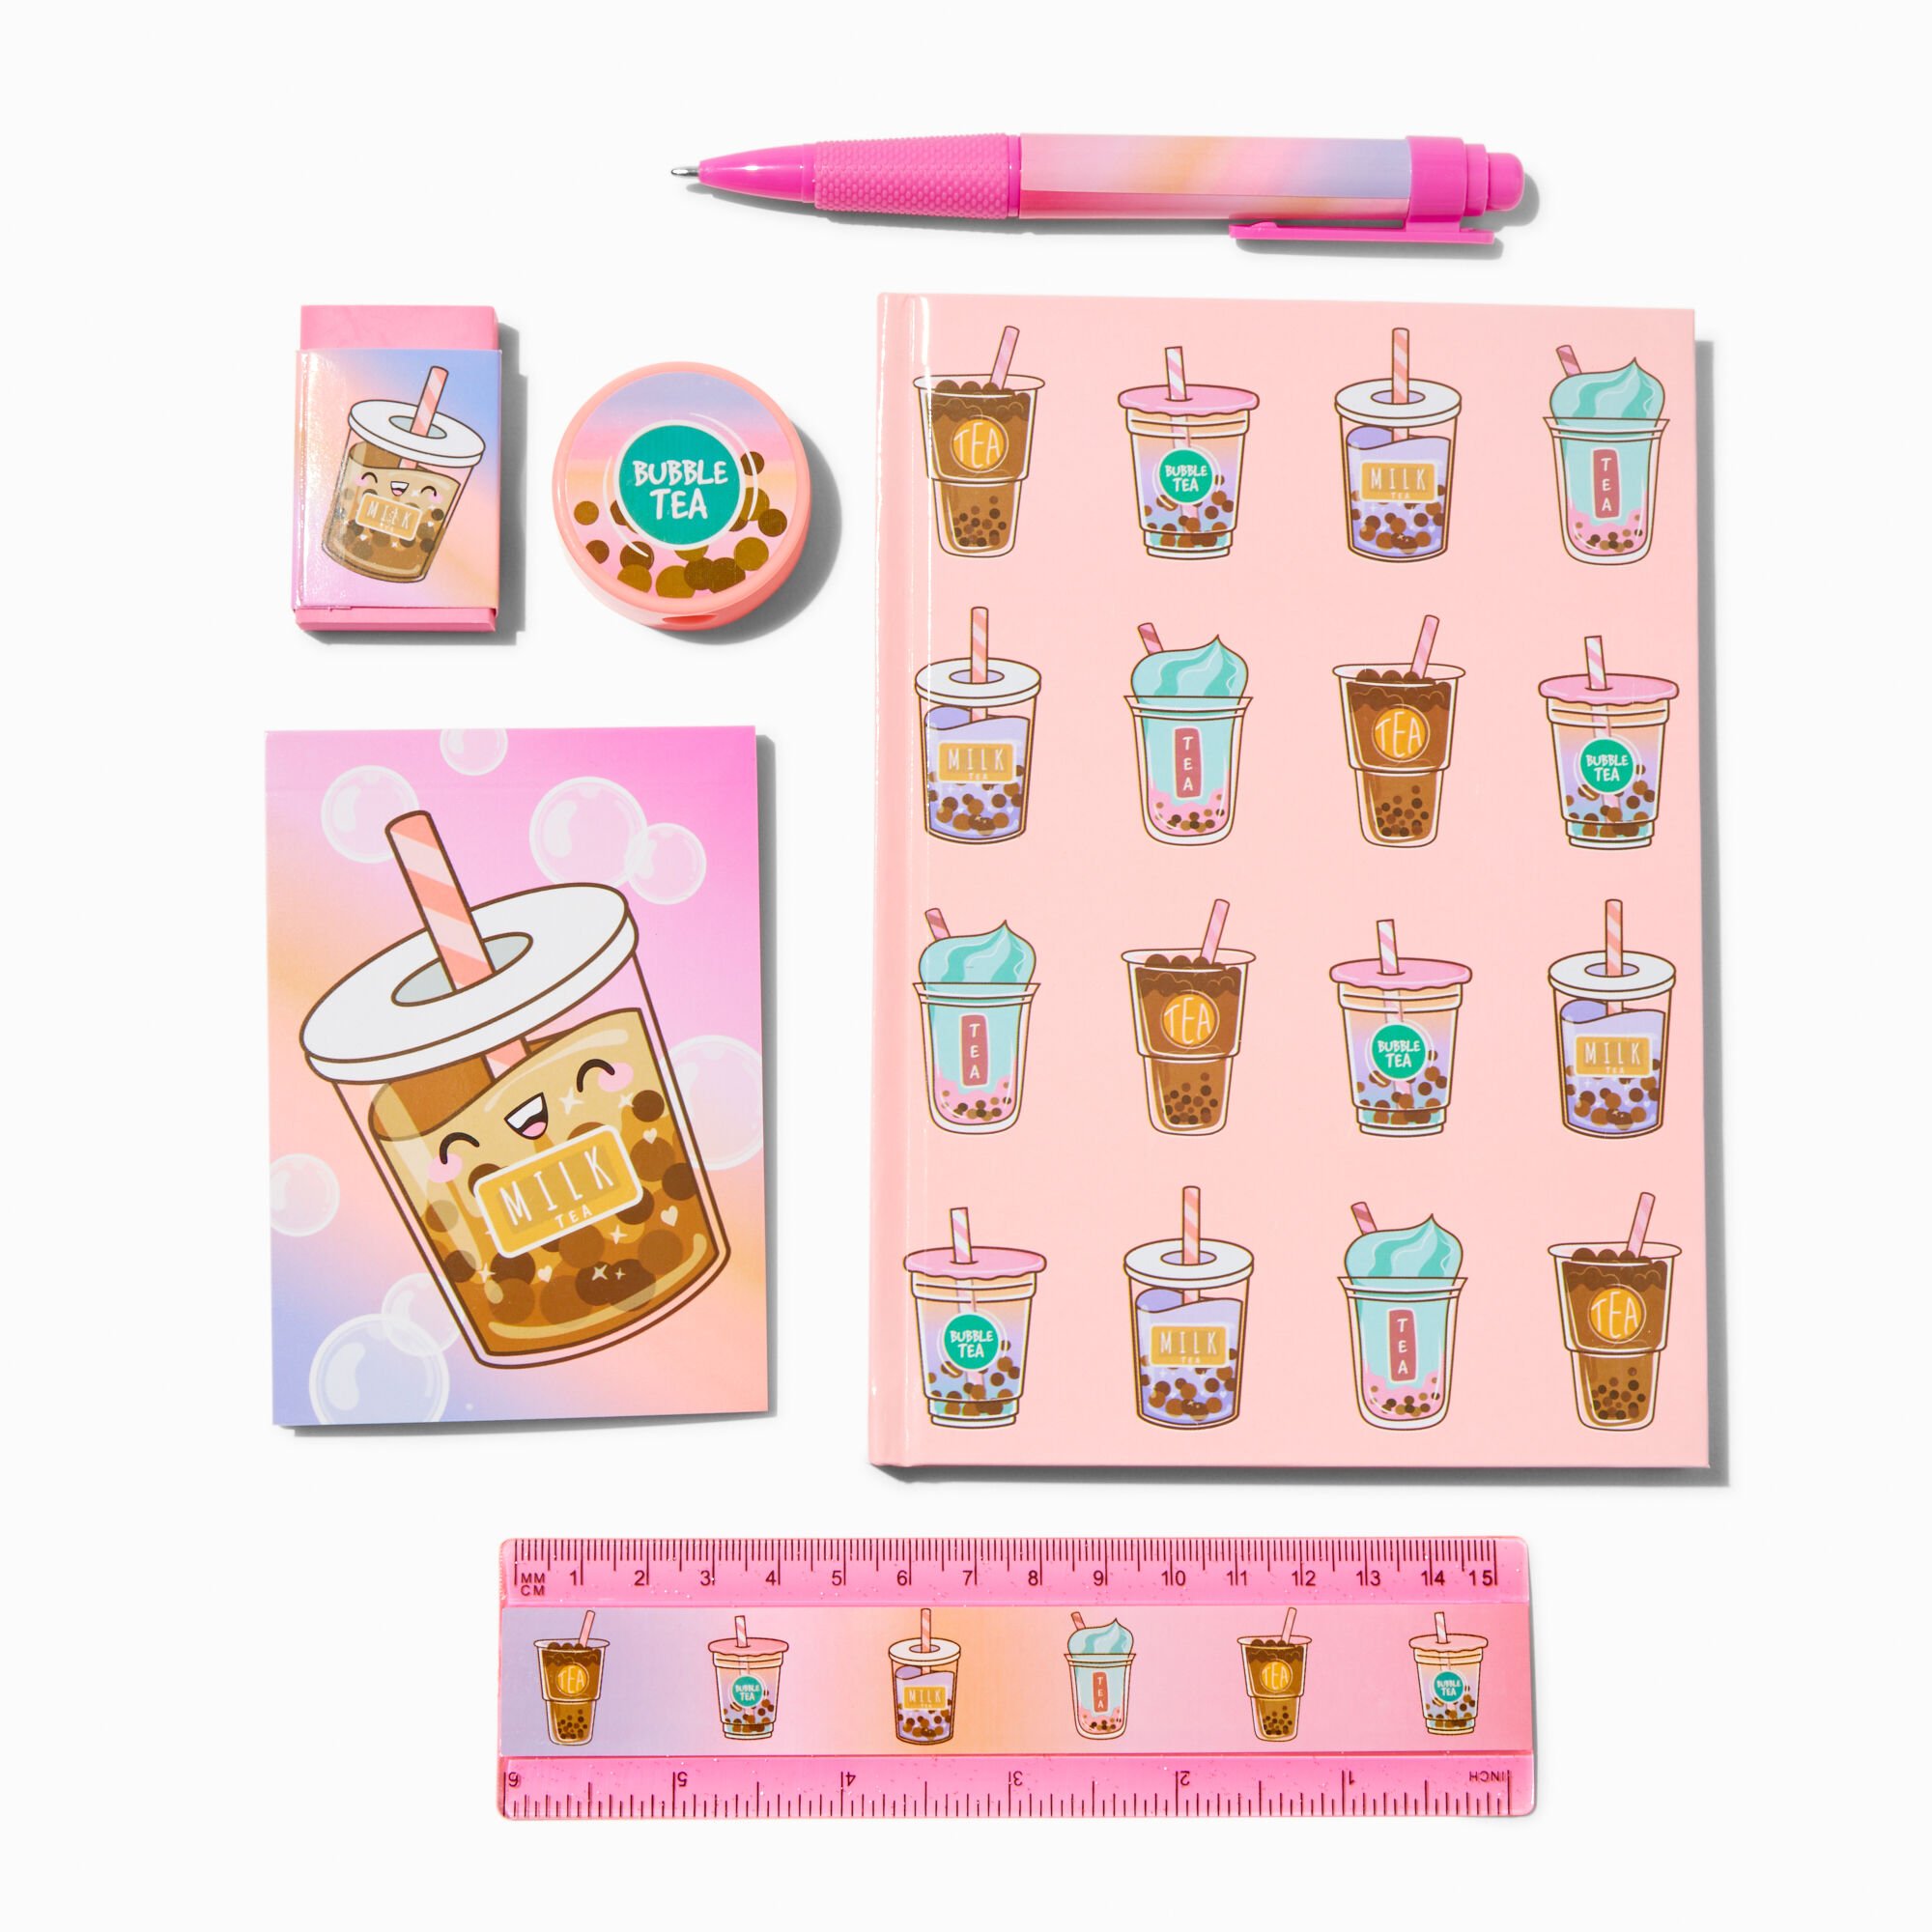 View Claires Boba Tea Stationery Set information